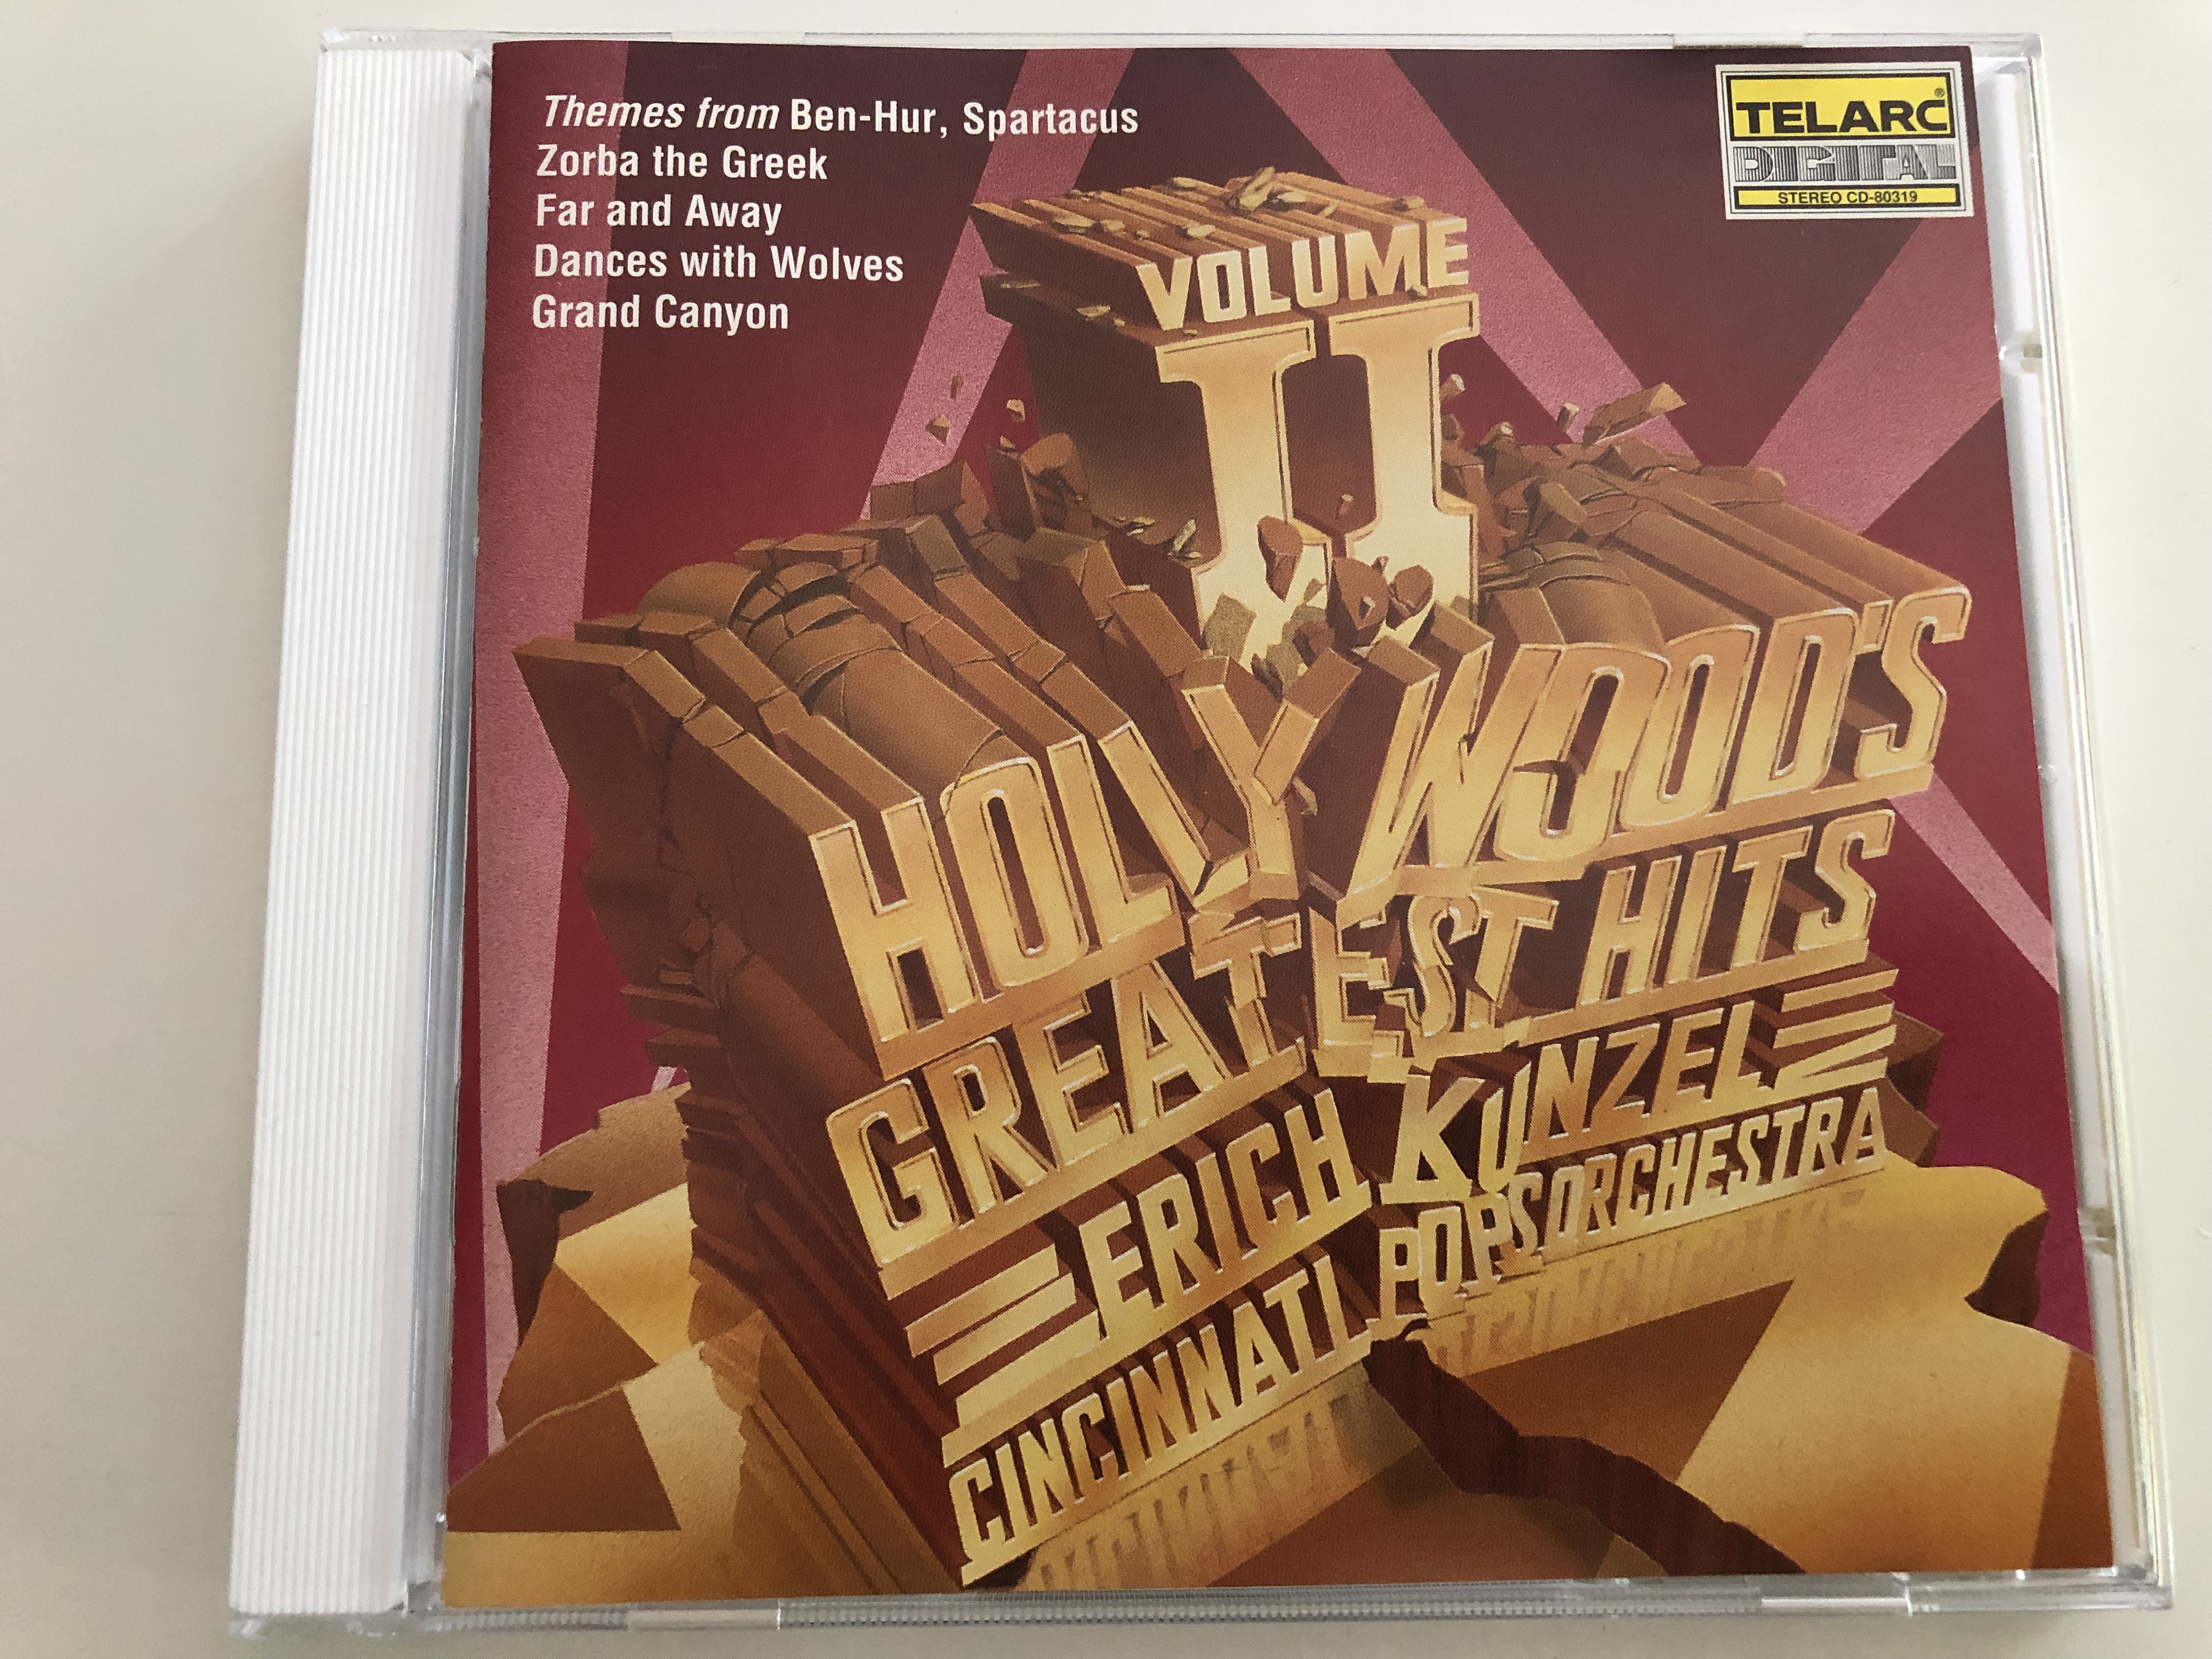 hollywood-s-greatest-hits-volume-2-themes-from-ben-hur-spartacus-zorba-the-greek-far-and-anway-dances-with-wolves-grand-canyon-cincinnati-pops-orchestra-conducted-by-erich-kunzel-telarc-cd-80319-audio-cd-1993-1-.jpg